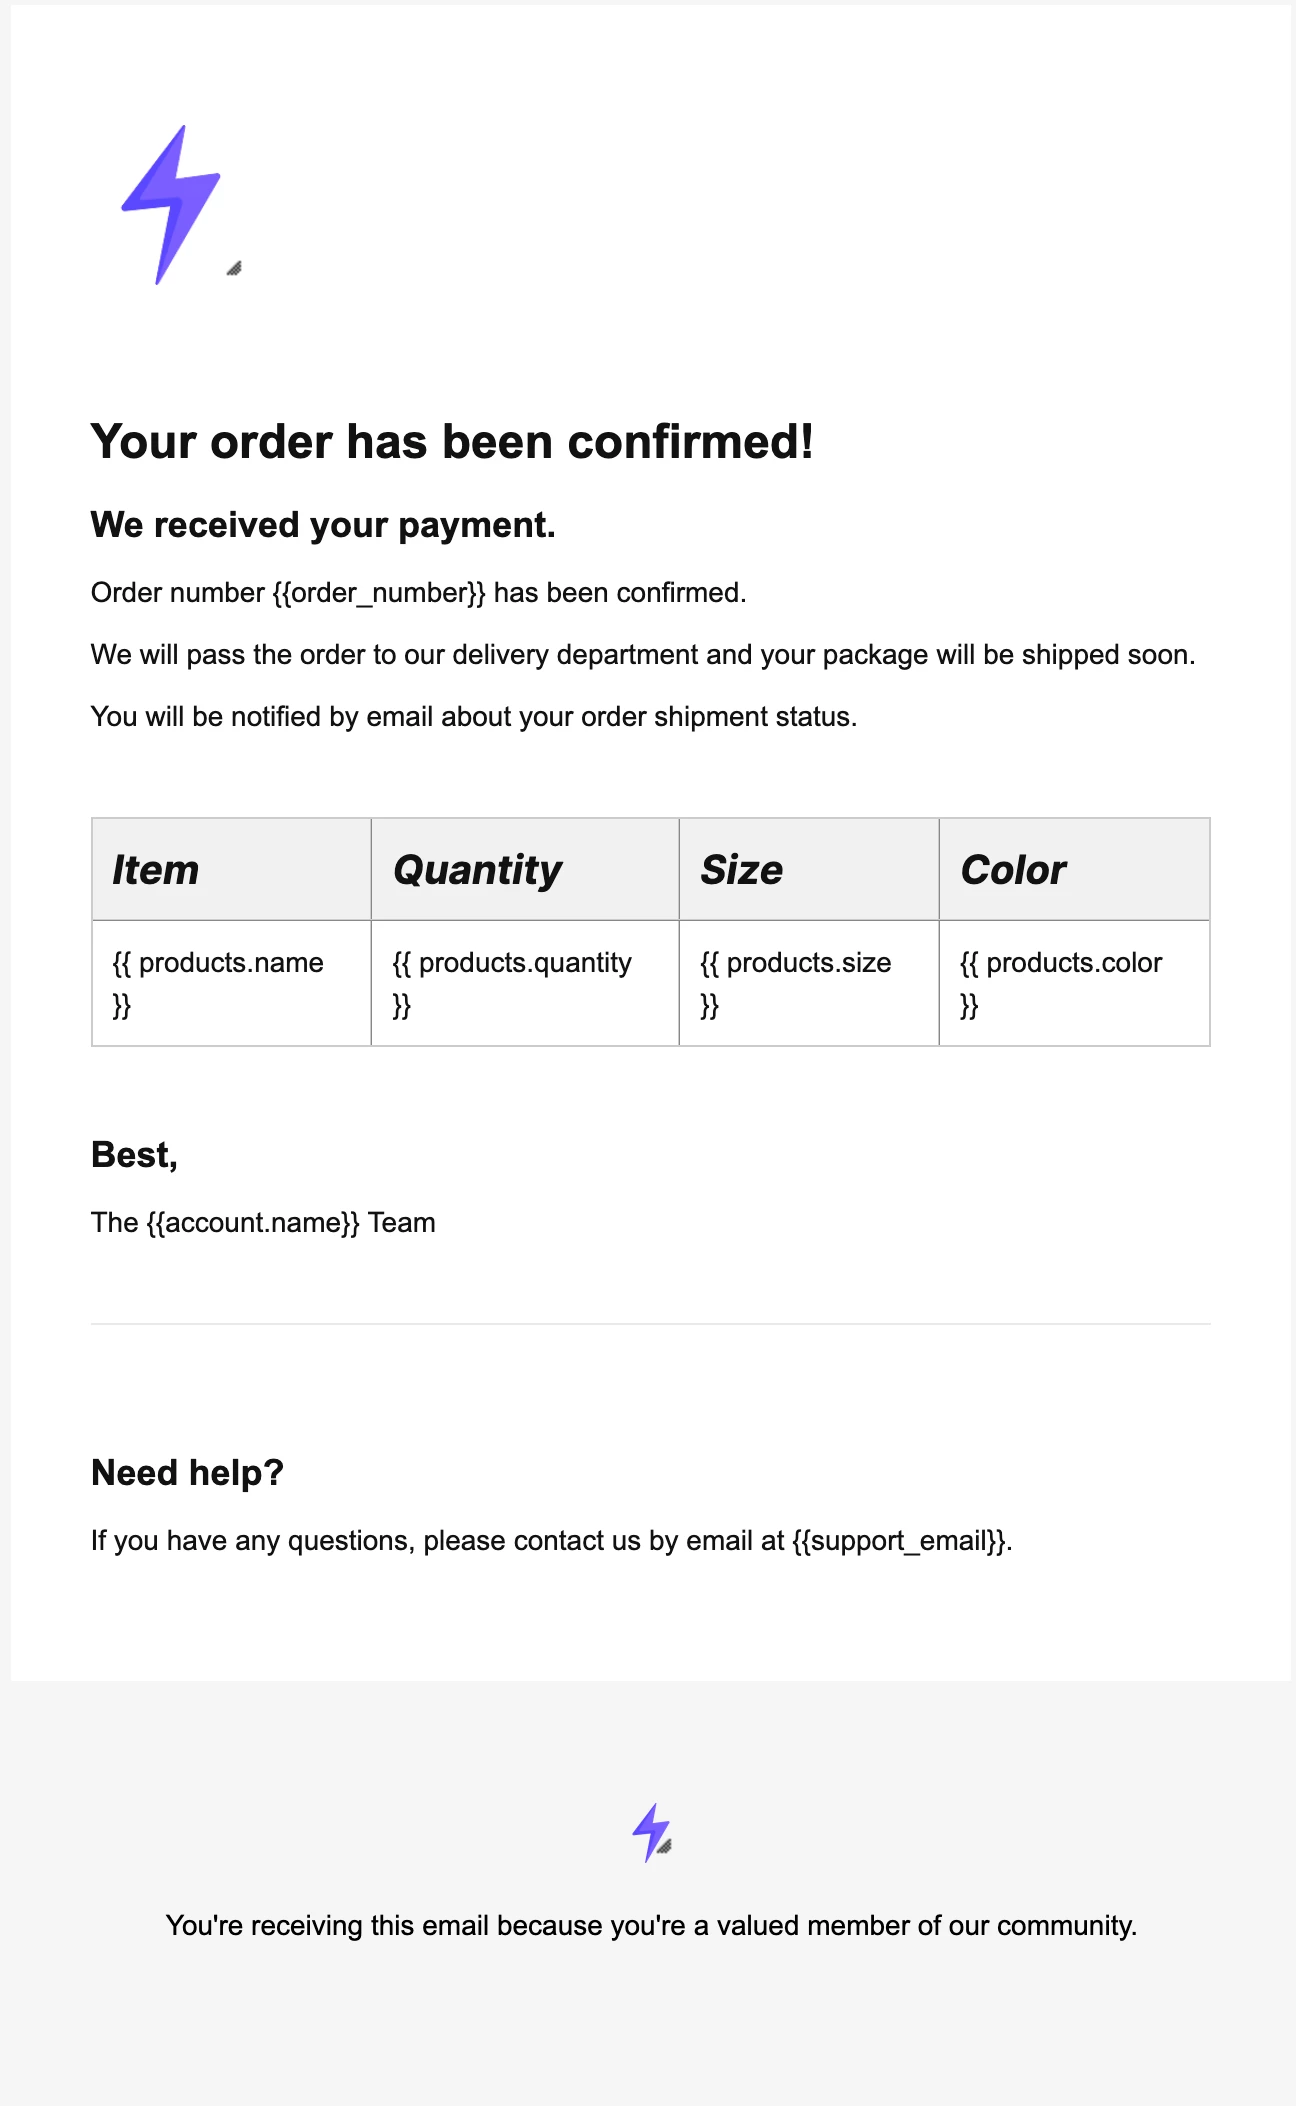 Example of an order confirmation emails that uses a dynamic template. 